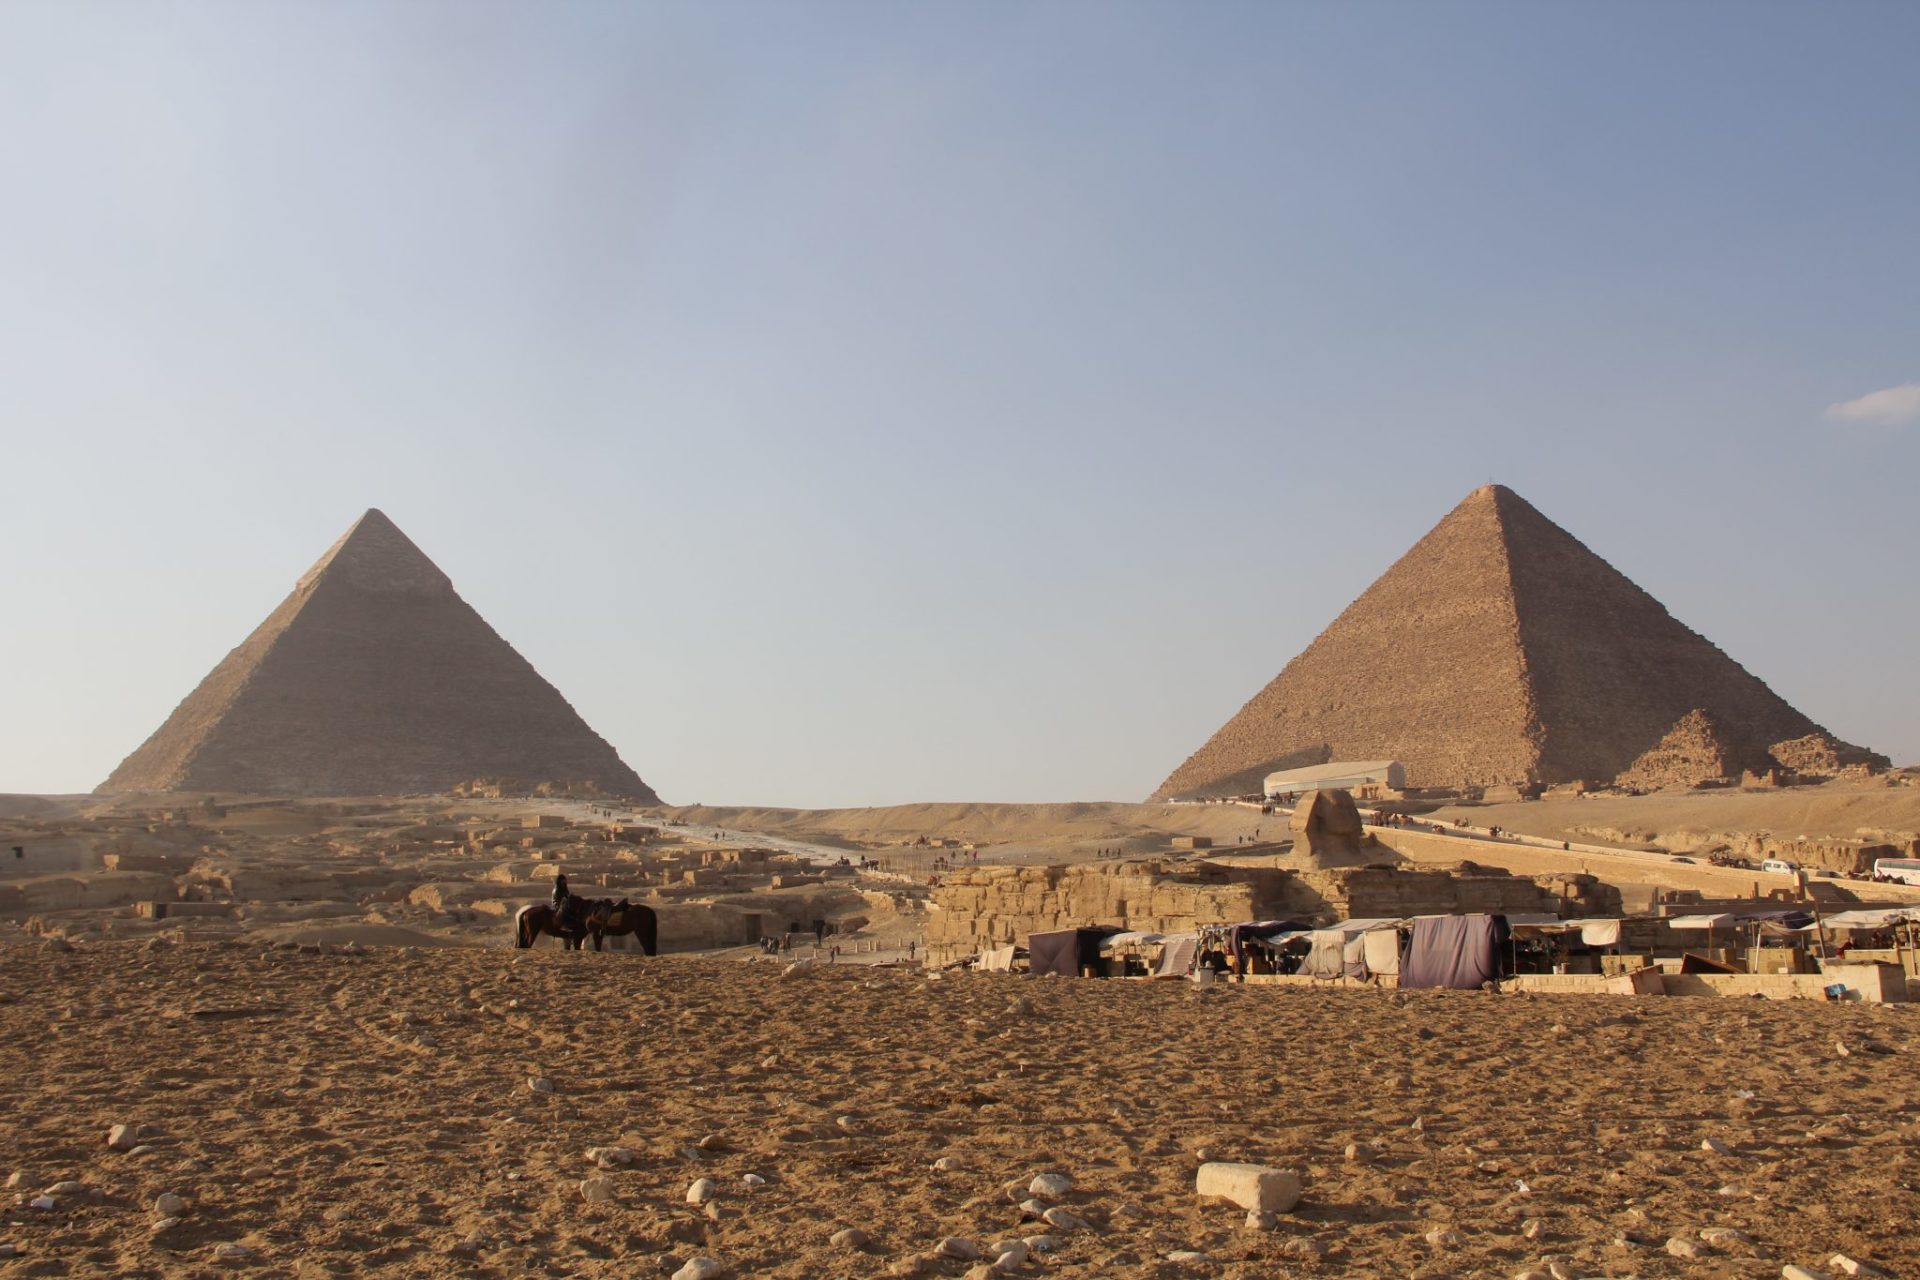 Pyramids of Gizeh with Sphinx